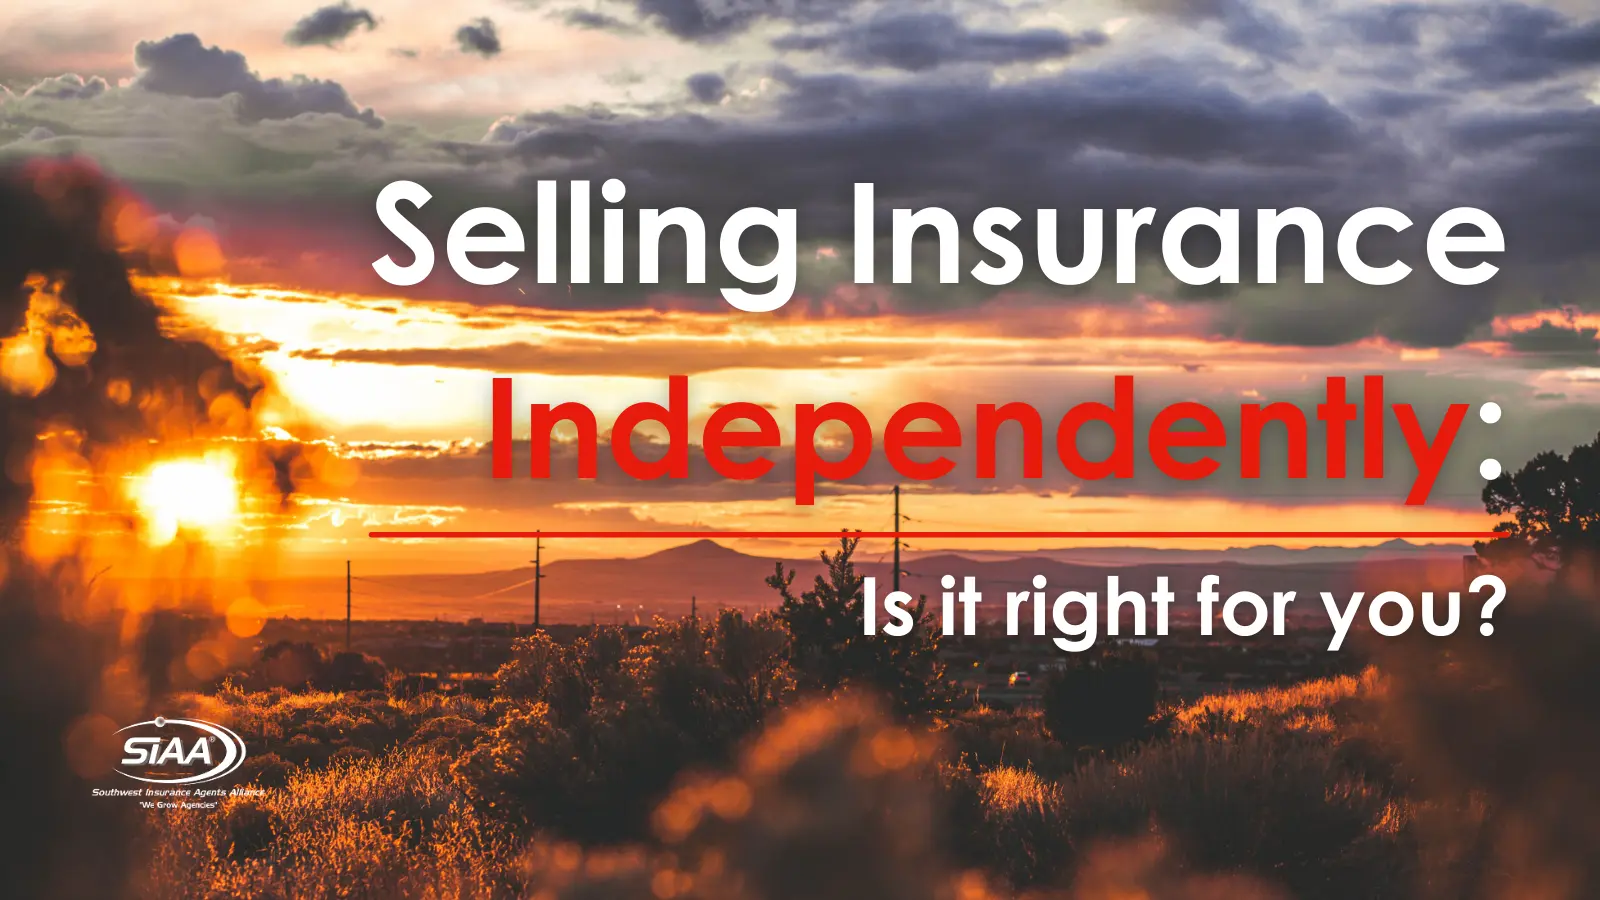 Selling Insurance Independently: Is It Right for You?